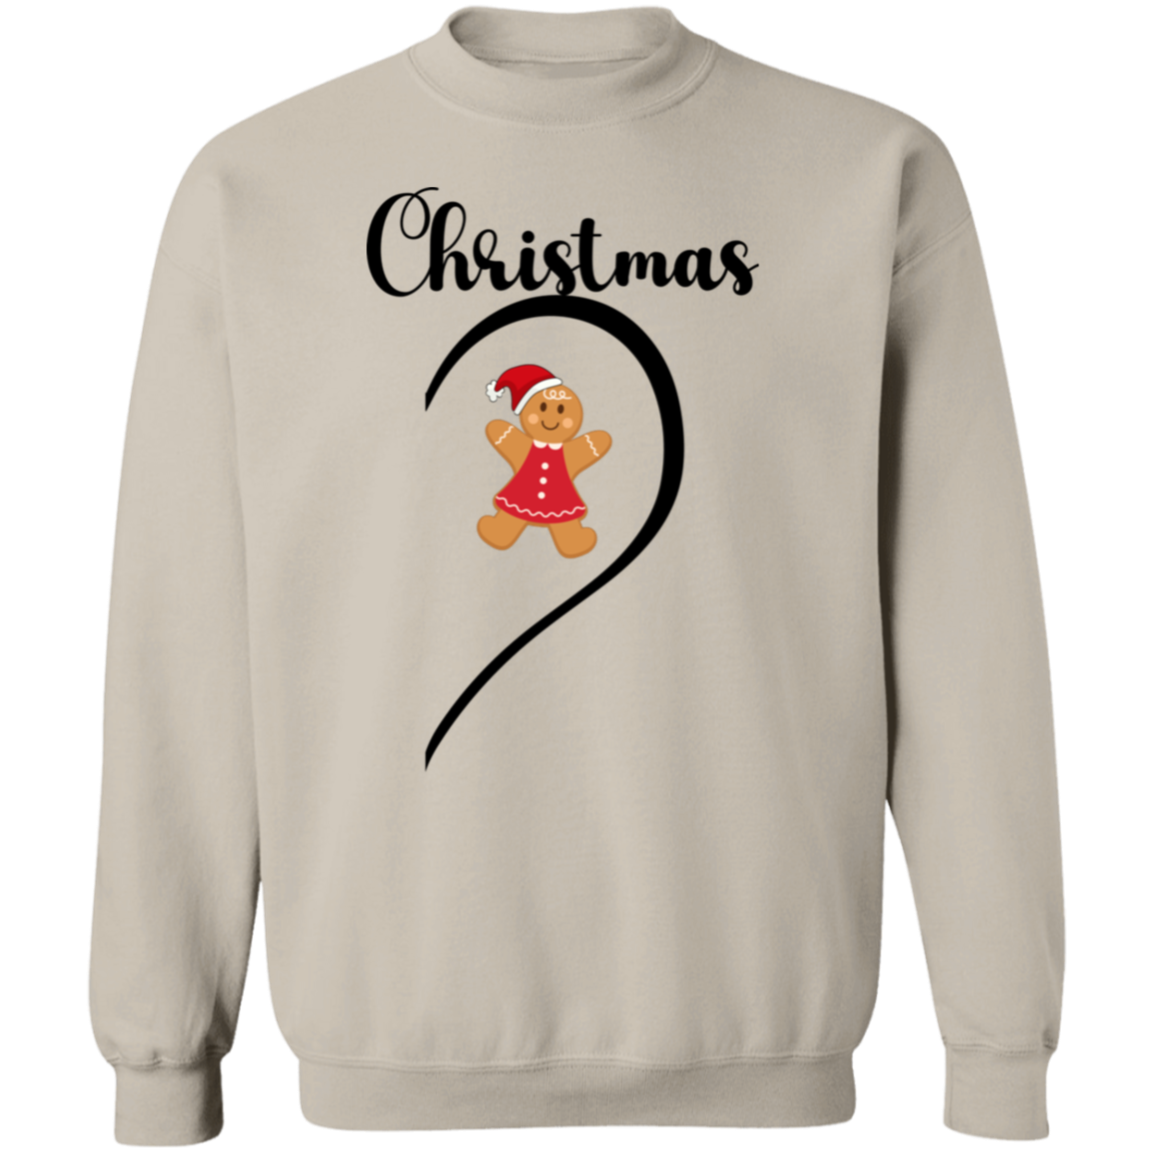 His and Her Couples Matching Sweaters (Merry/Christmas)- Unisex Ugly Sweater, Christmas, Winter, Fall